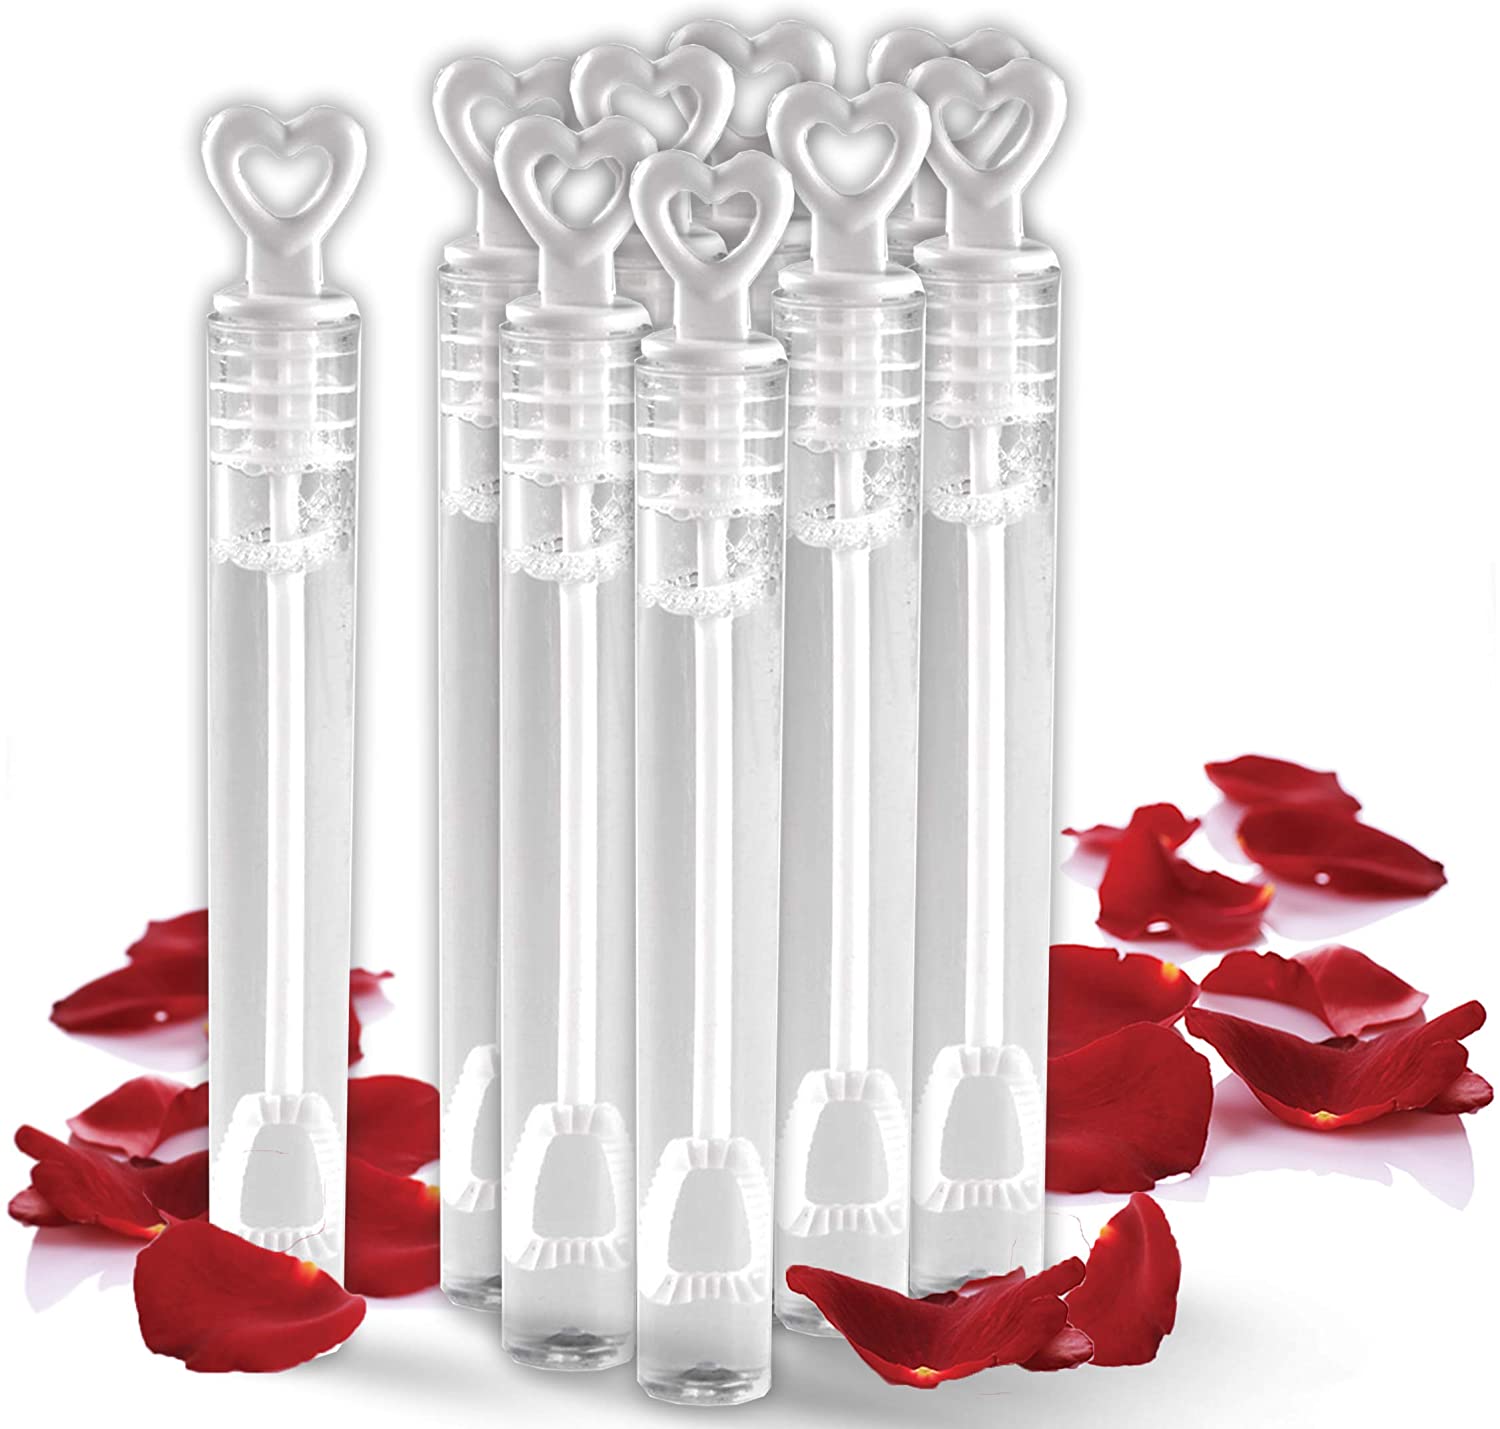 40 Pack Mini Heart Bubble Wands  Great Wand Bubbles Party Favors For Weddings - image 1 of 7